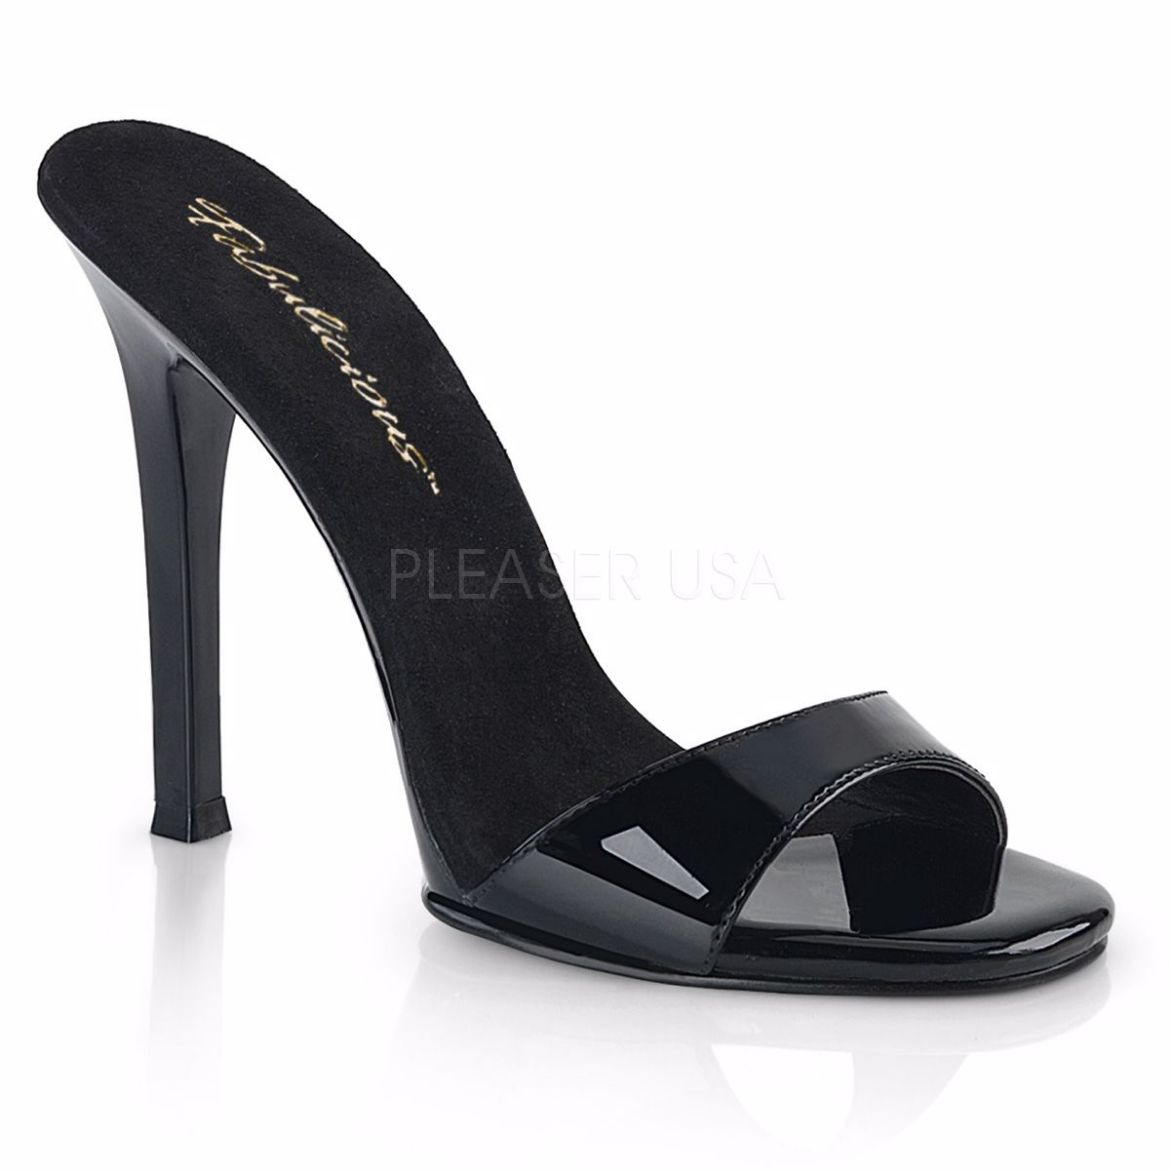 Product image of Fabulicious Gala-01S Black Patent/Black, 4 1/2 inch (11.4 cm) Heel Slide Mule Shoes